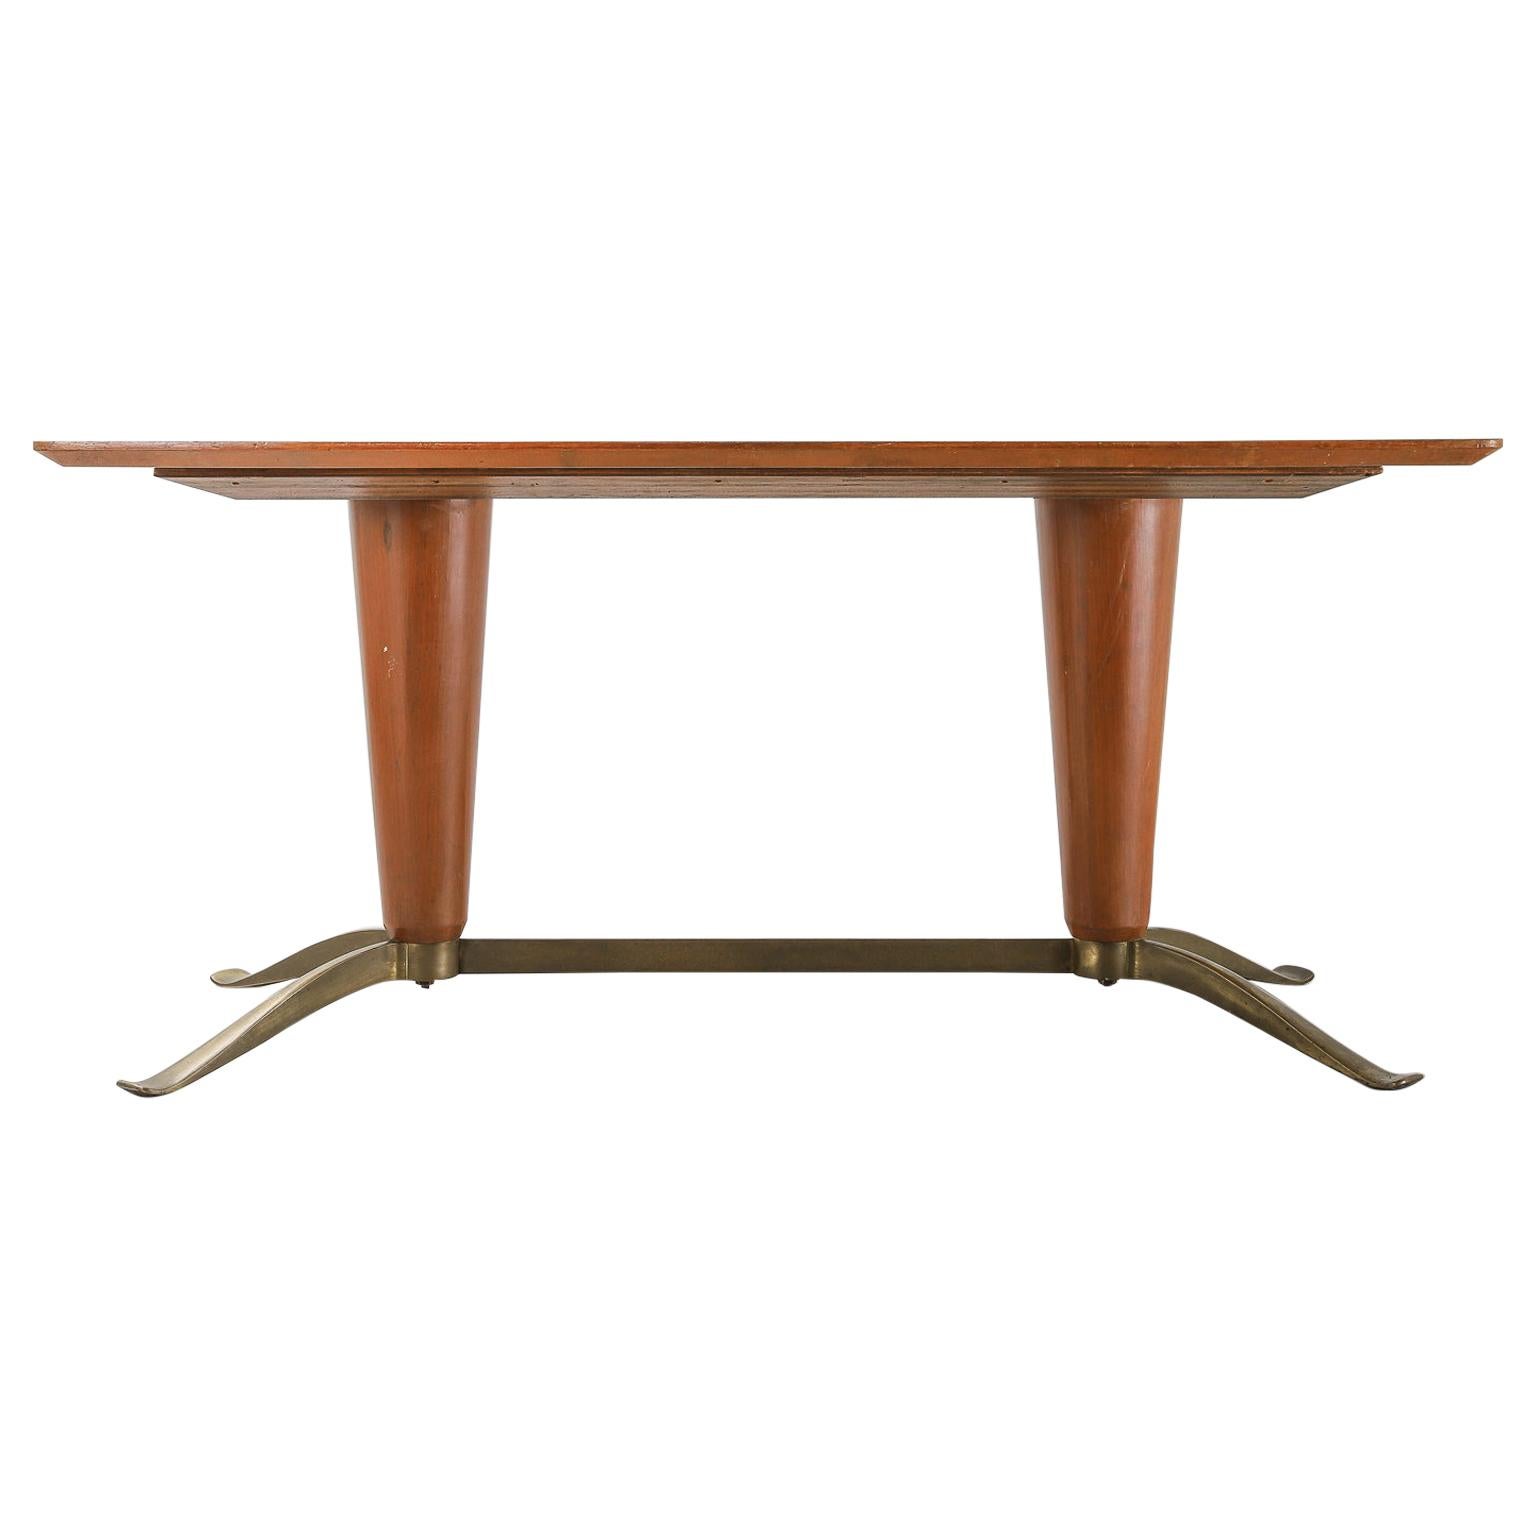 Mid-20th Century Honey Coloured Starburst Pattern Dining Table with Brass Feet